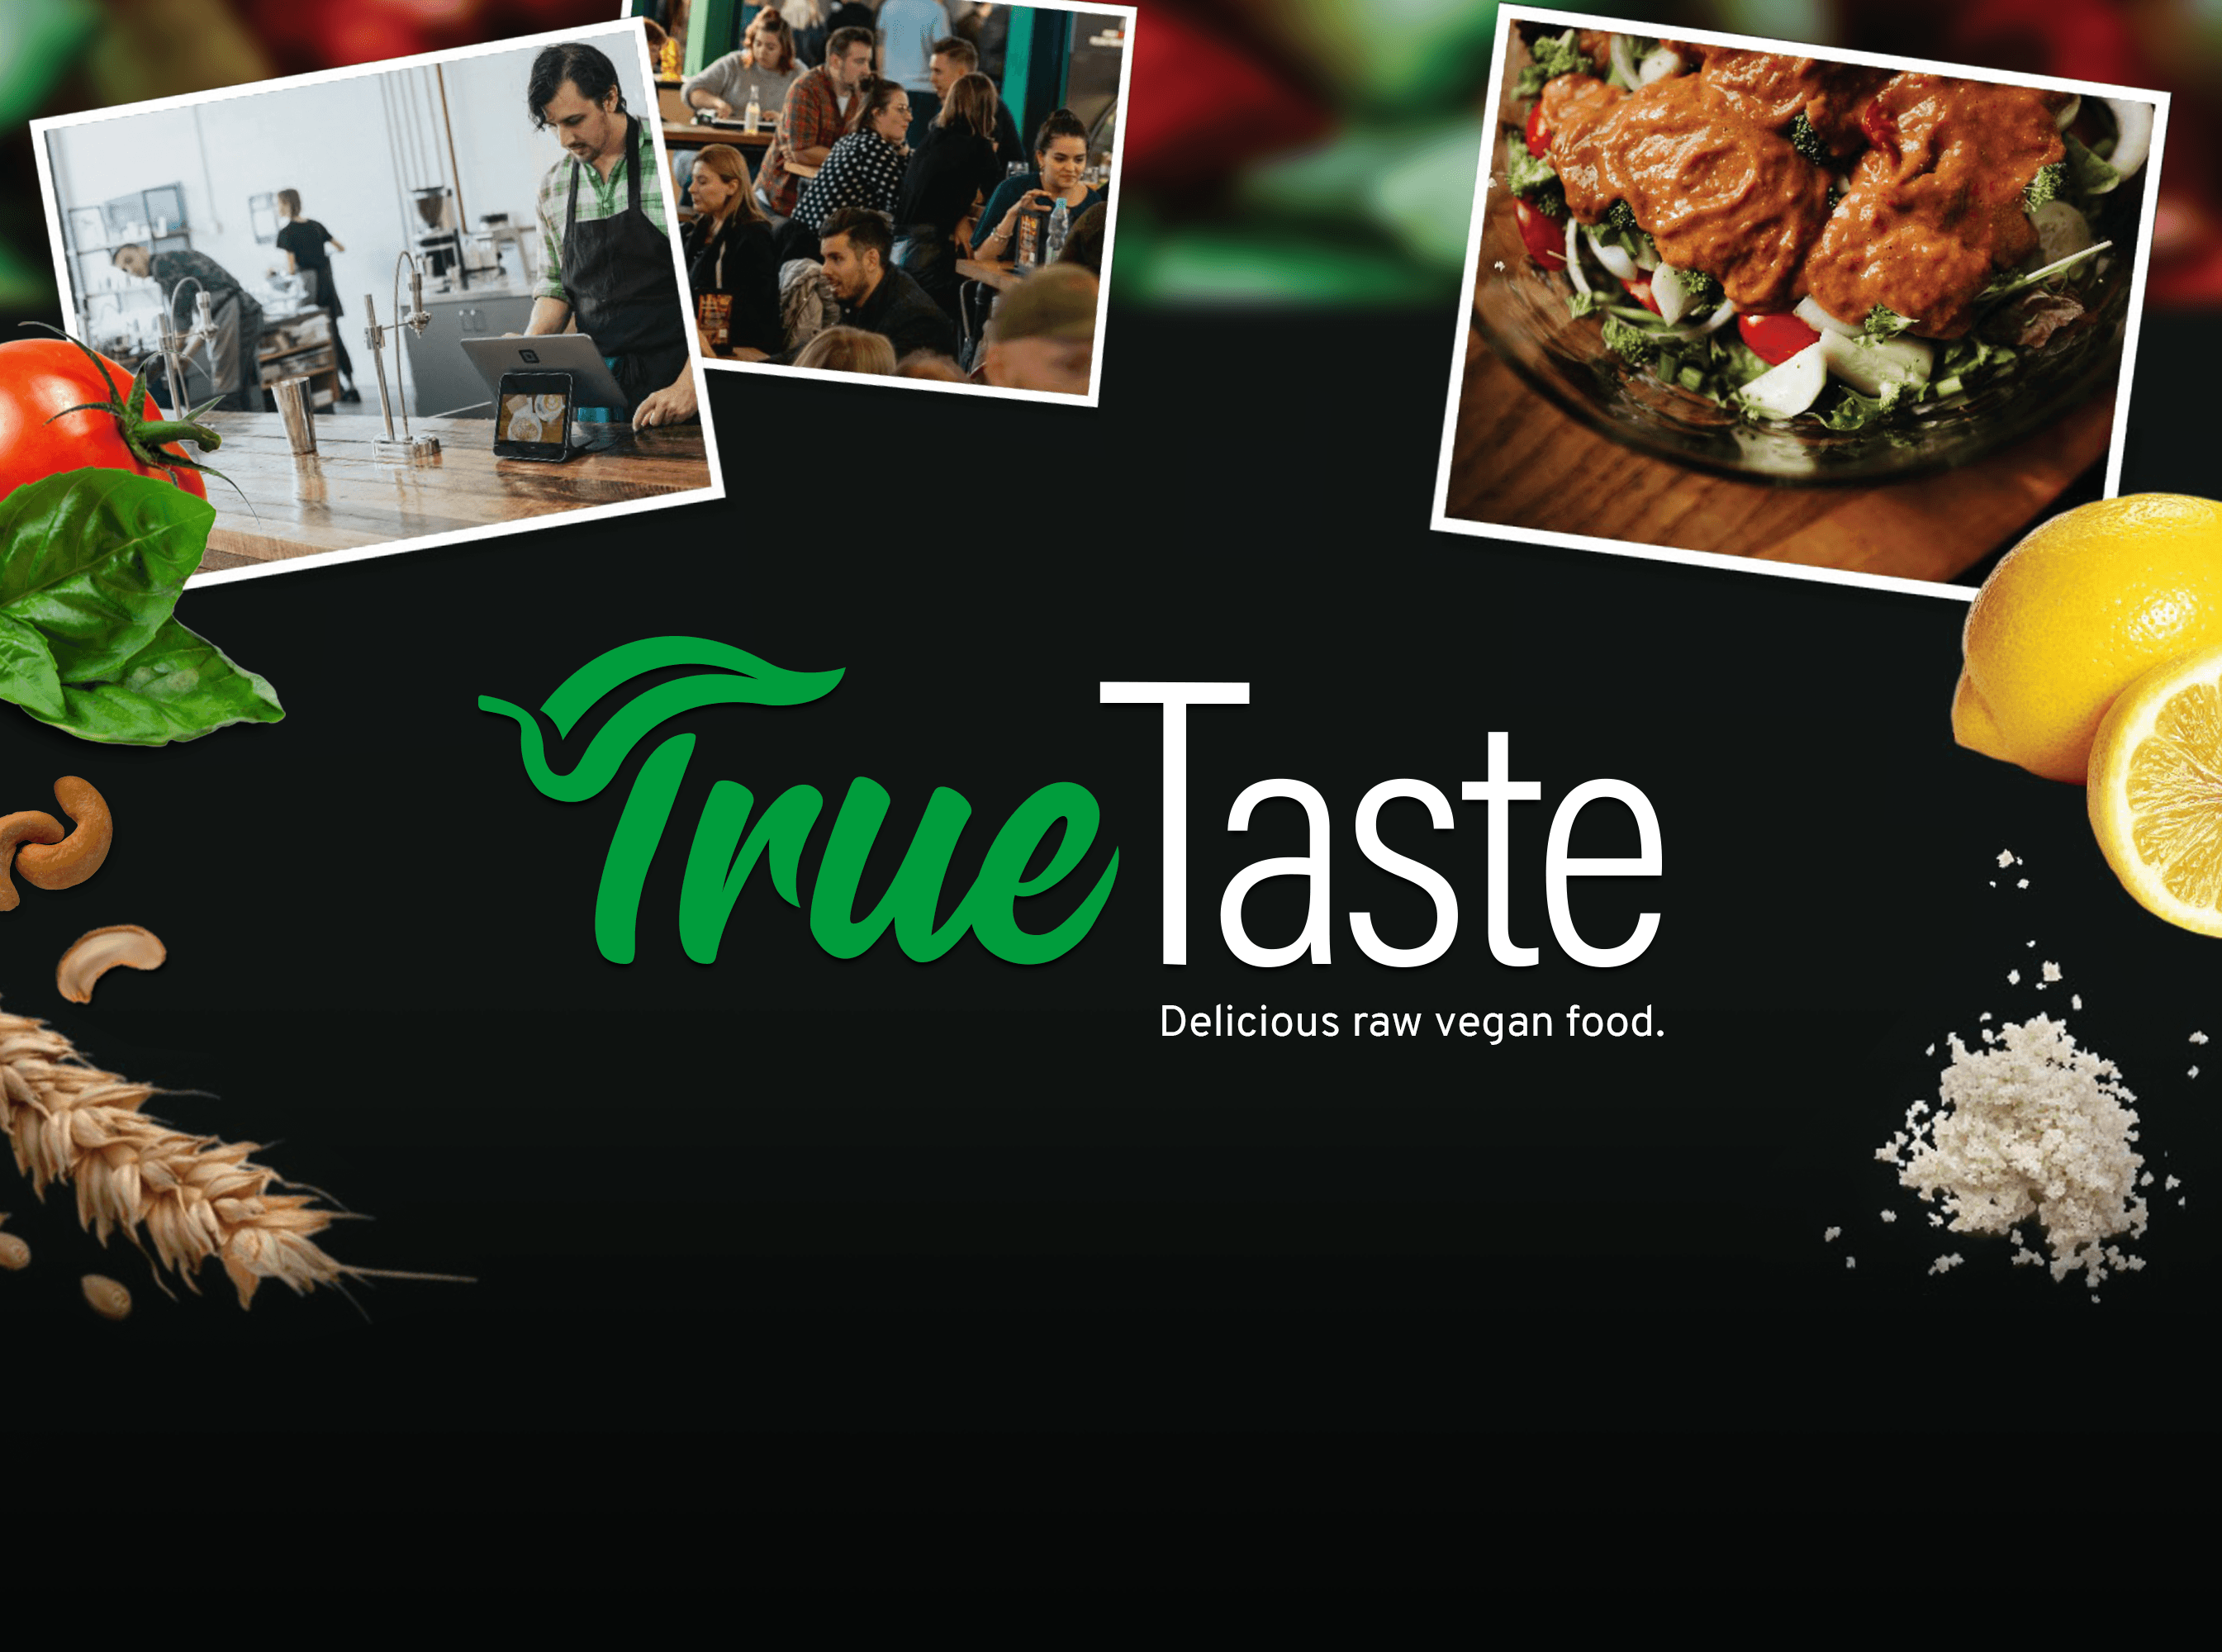 A brand identity showing logo and close ups of fresh food for a raw vegan restaurant called TrueTaste